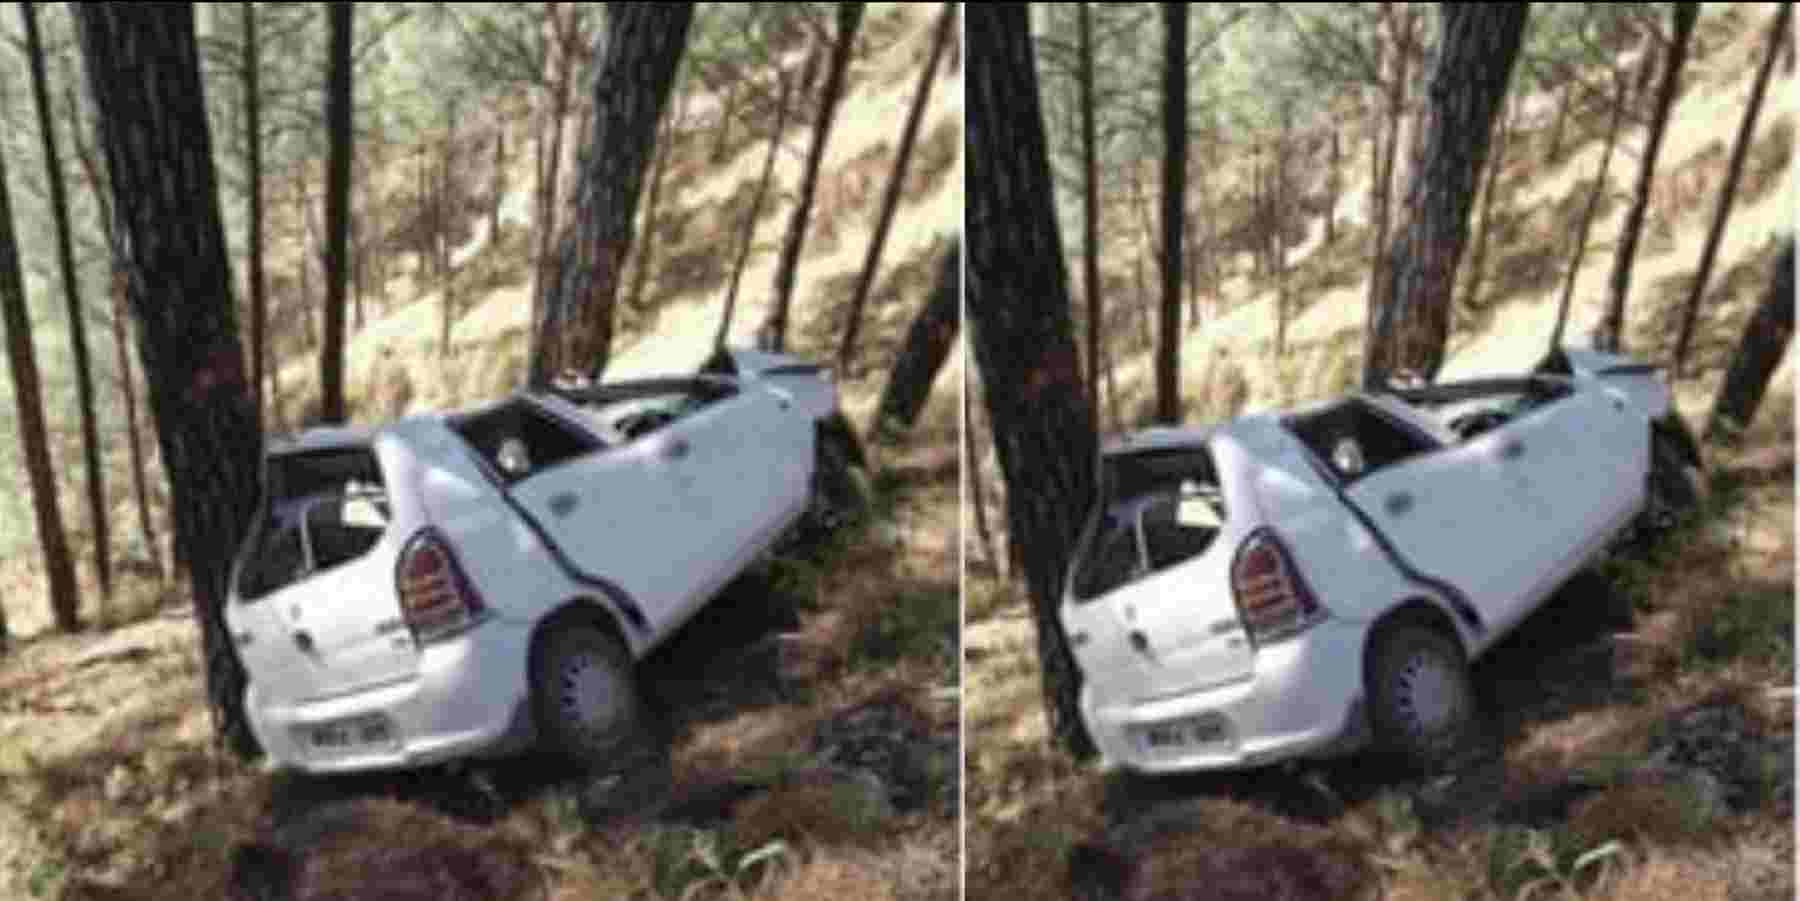 Uttarakhand news: A pine tree saved the lives of 5 friends when their car accident rolled into a ditch in Rudraprayag. Rudraprayag car accident